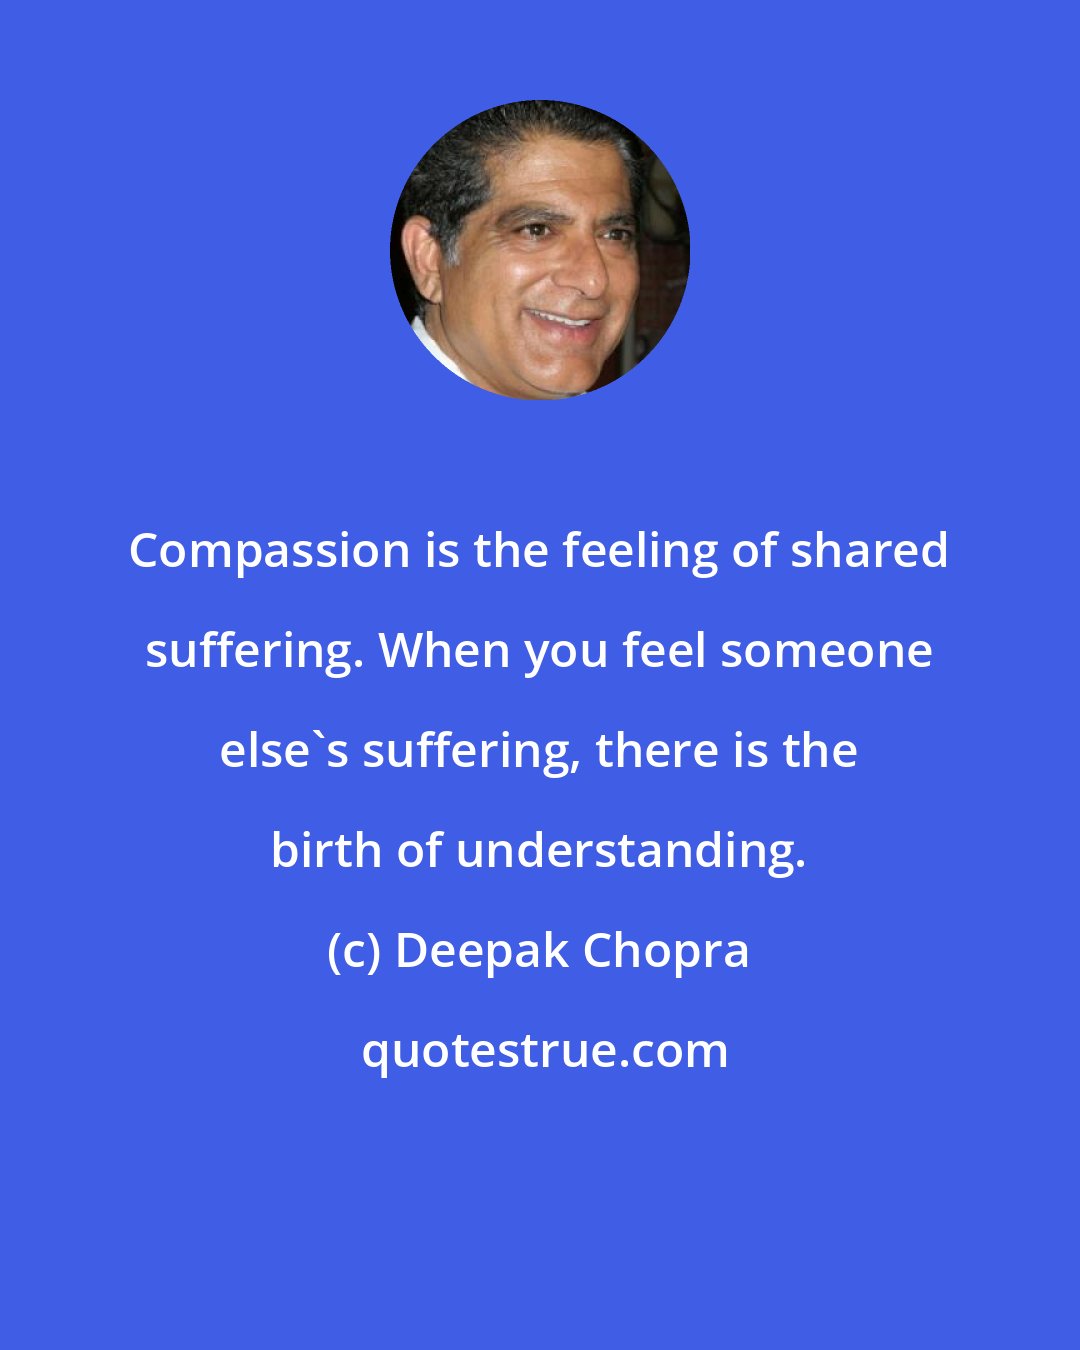 Deepak Chopra: Compassion is the feeling of shared suffering. When you feel someone else's suffering, there is the birth of understanding.